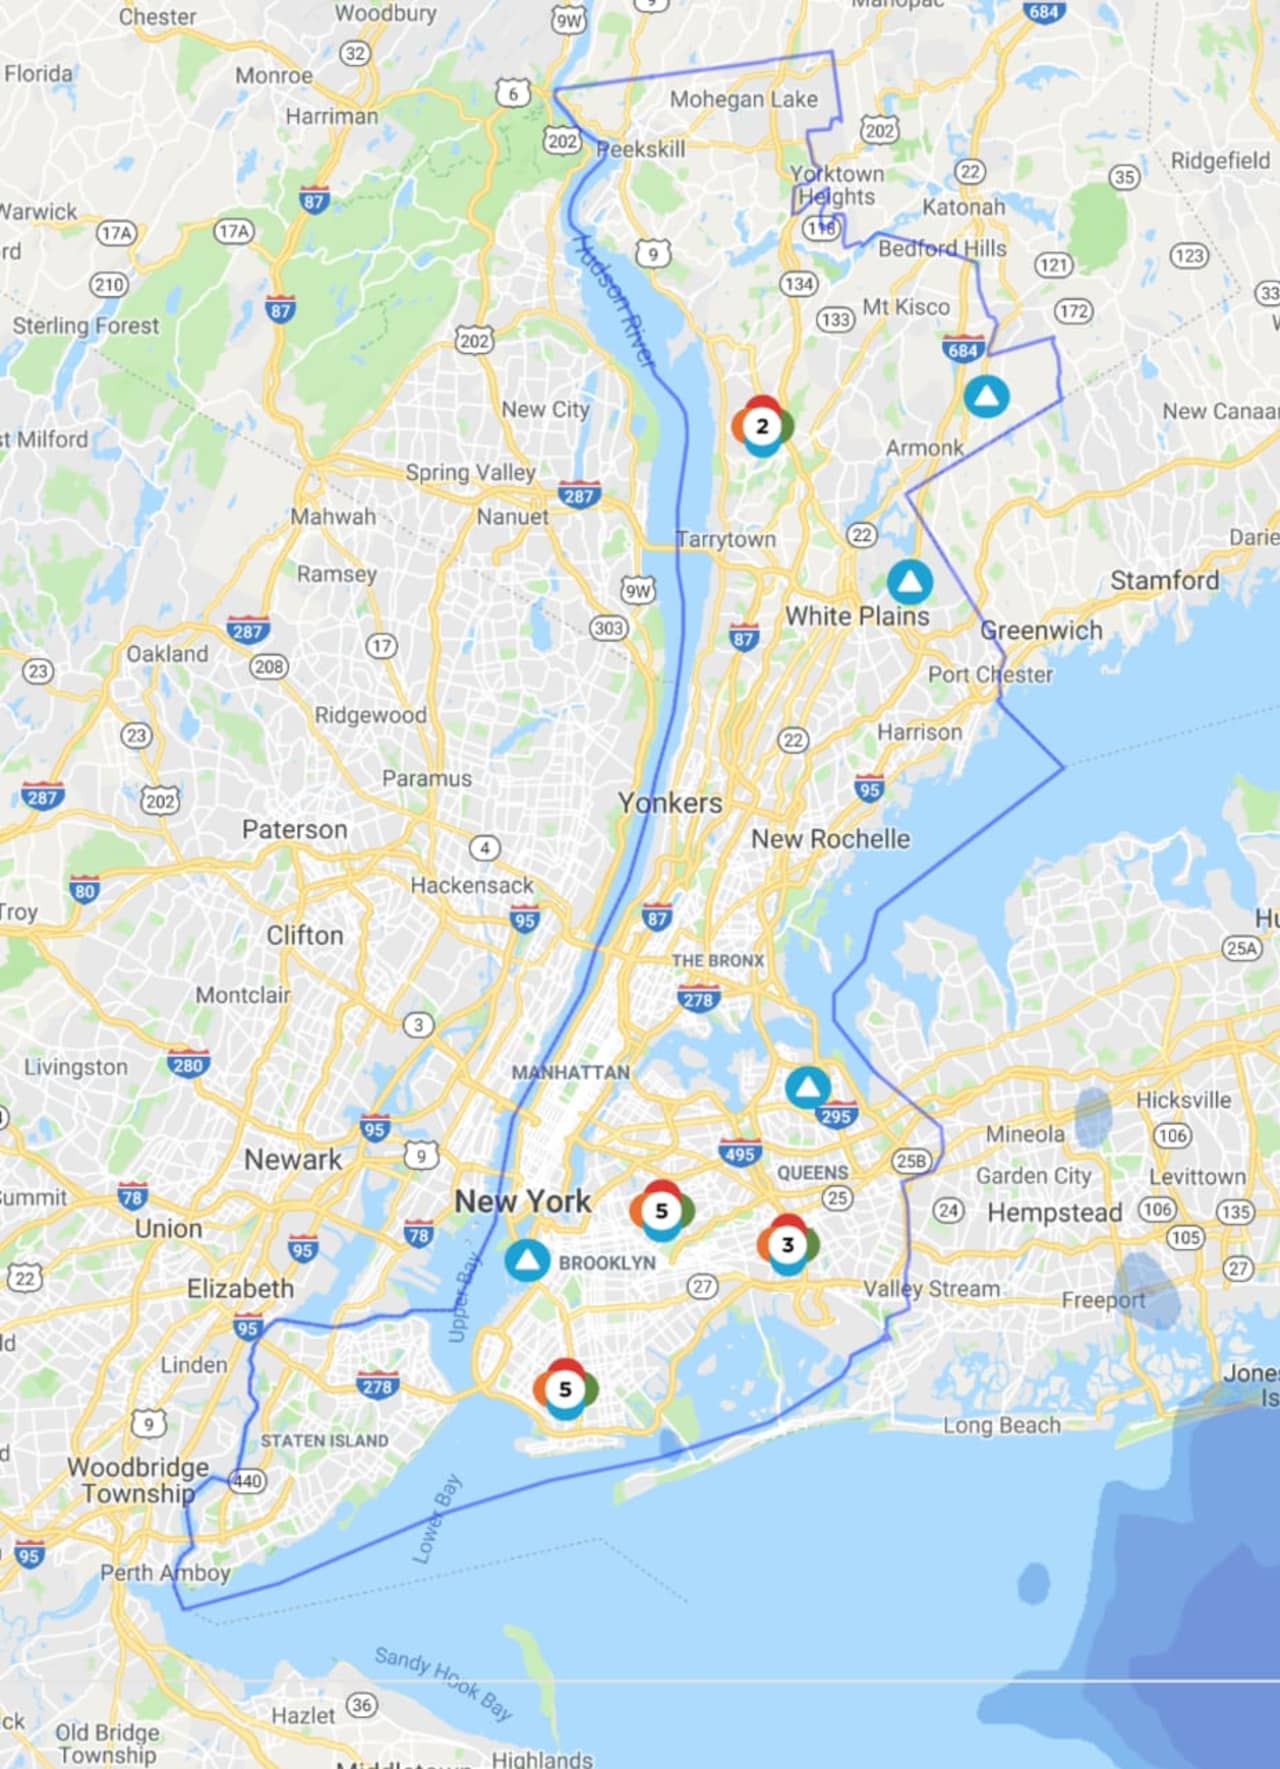 The Con Edison Outage Map as of 9:30 a.m. on Monday, April 15.